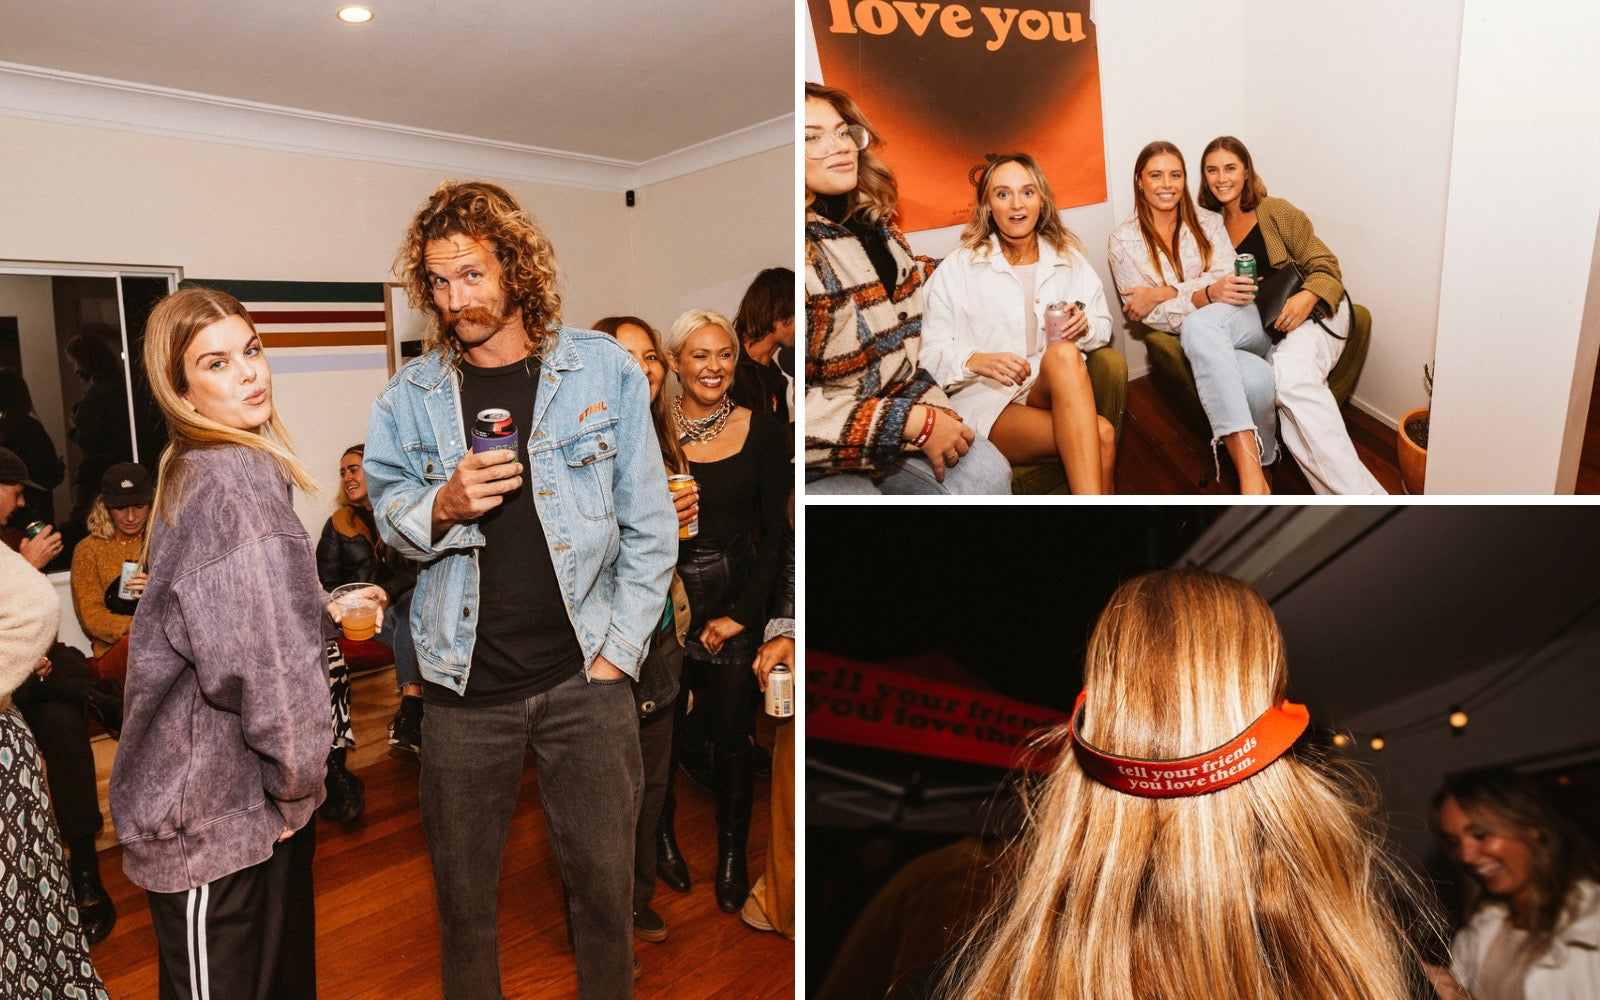 Childe x Tell Your Friends You Love Them - Love Street Love Childe Launch 05